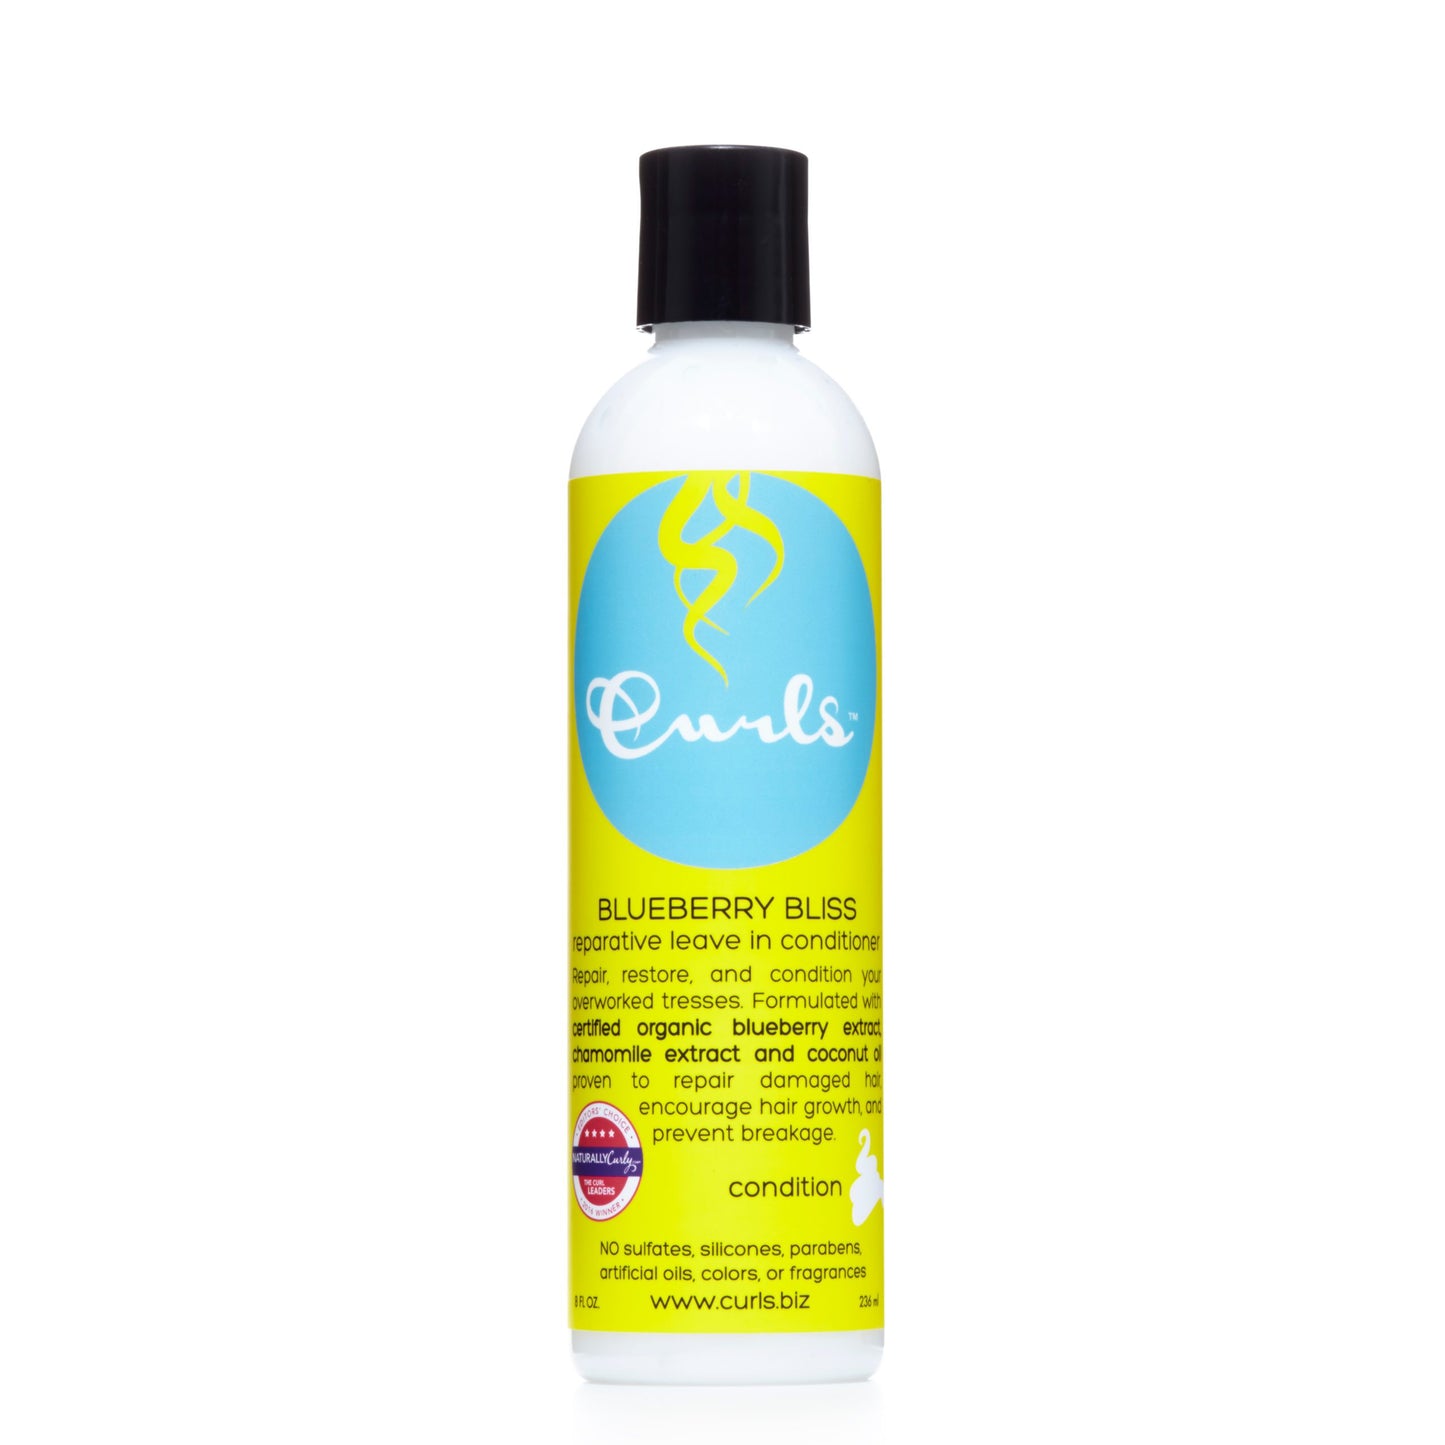 Curls Blueberry Bliss Reparative Leave In Beauty Supply store, all natural products for women, men, and kids. The wh shop is the sephora for black owned brands